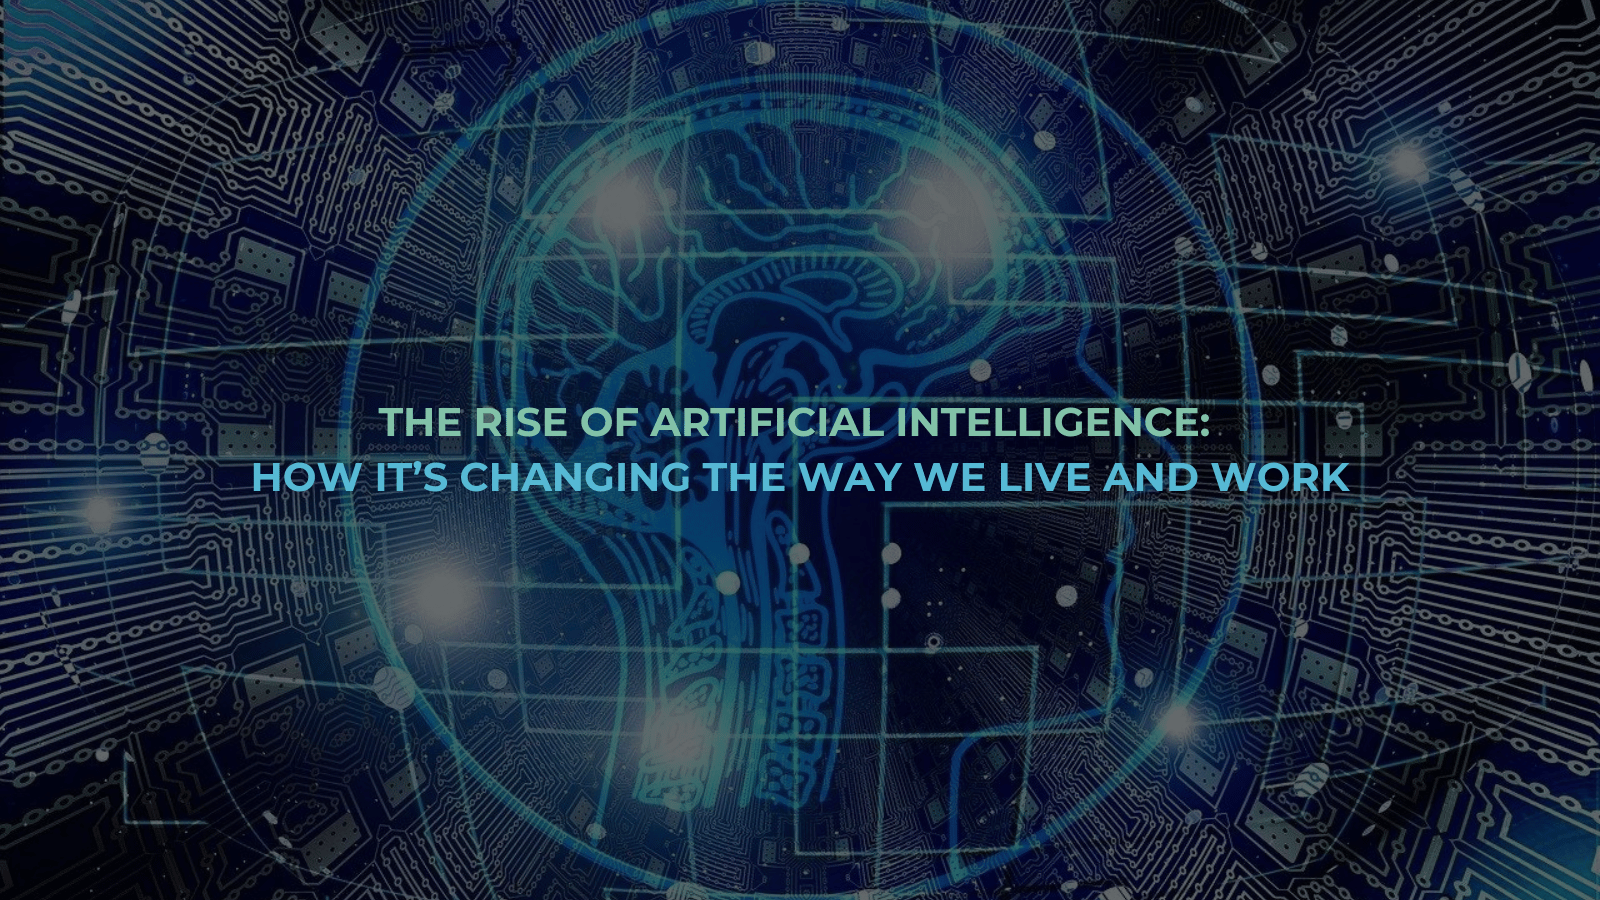 The Rise of Artificial Intelligence How It’s Changing the Way We Live